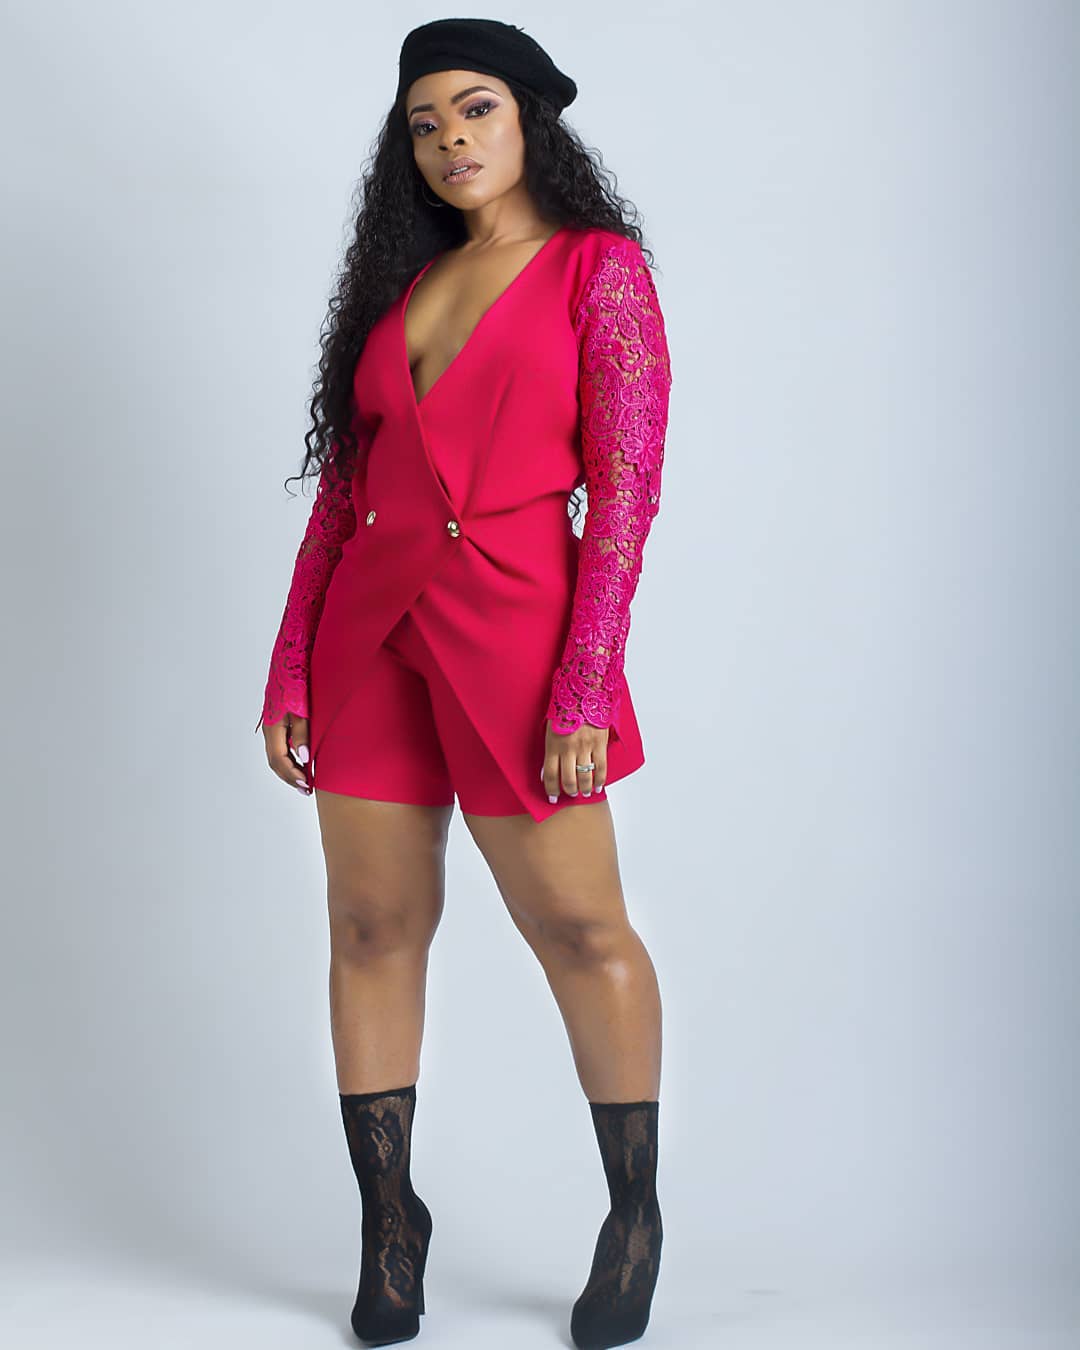 Laura Ikeji Steps Out In An Enticing Outfit - Celebrities - Nigeria